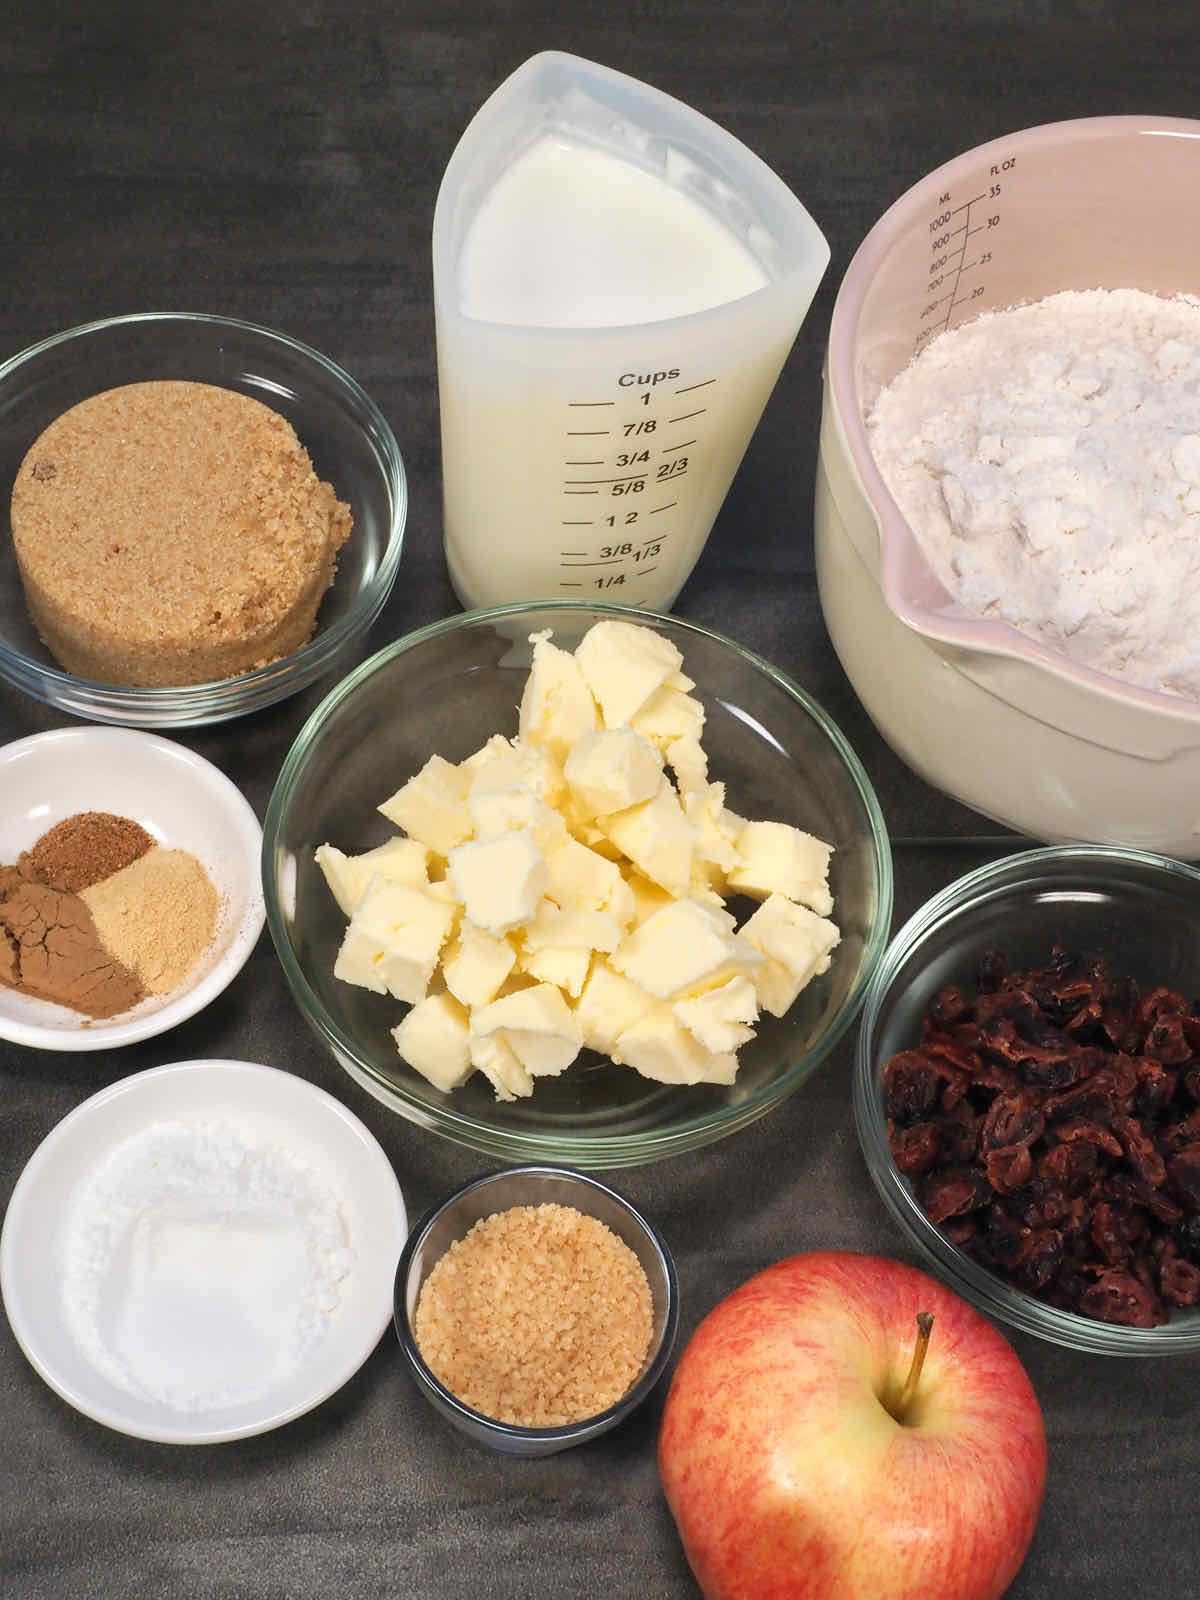 Ingredients to make scones with cranberries and apples.